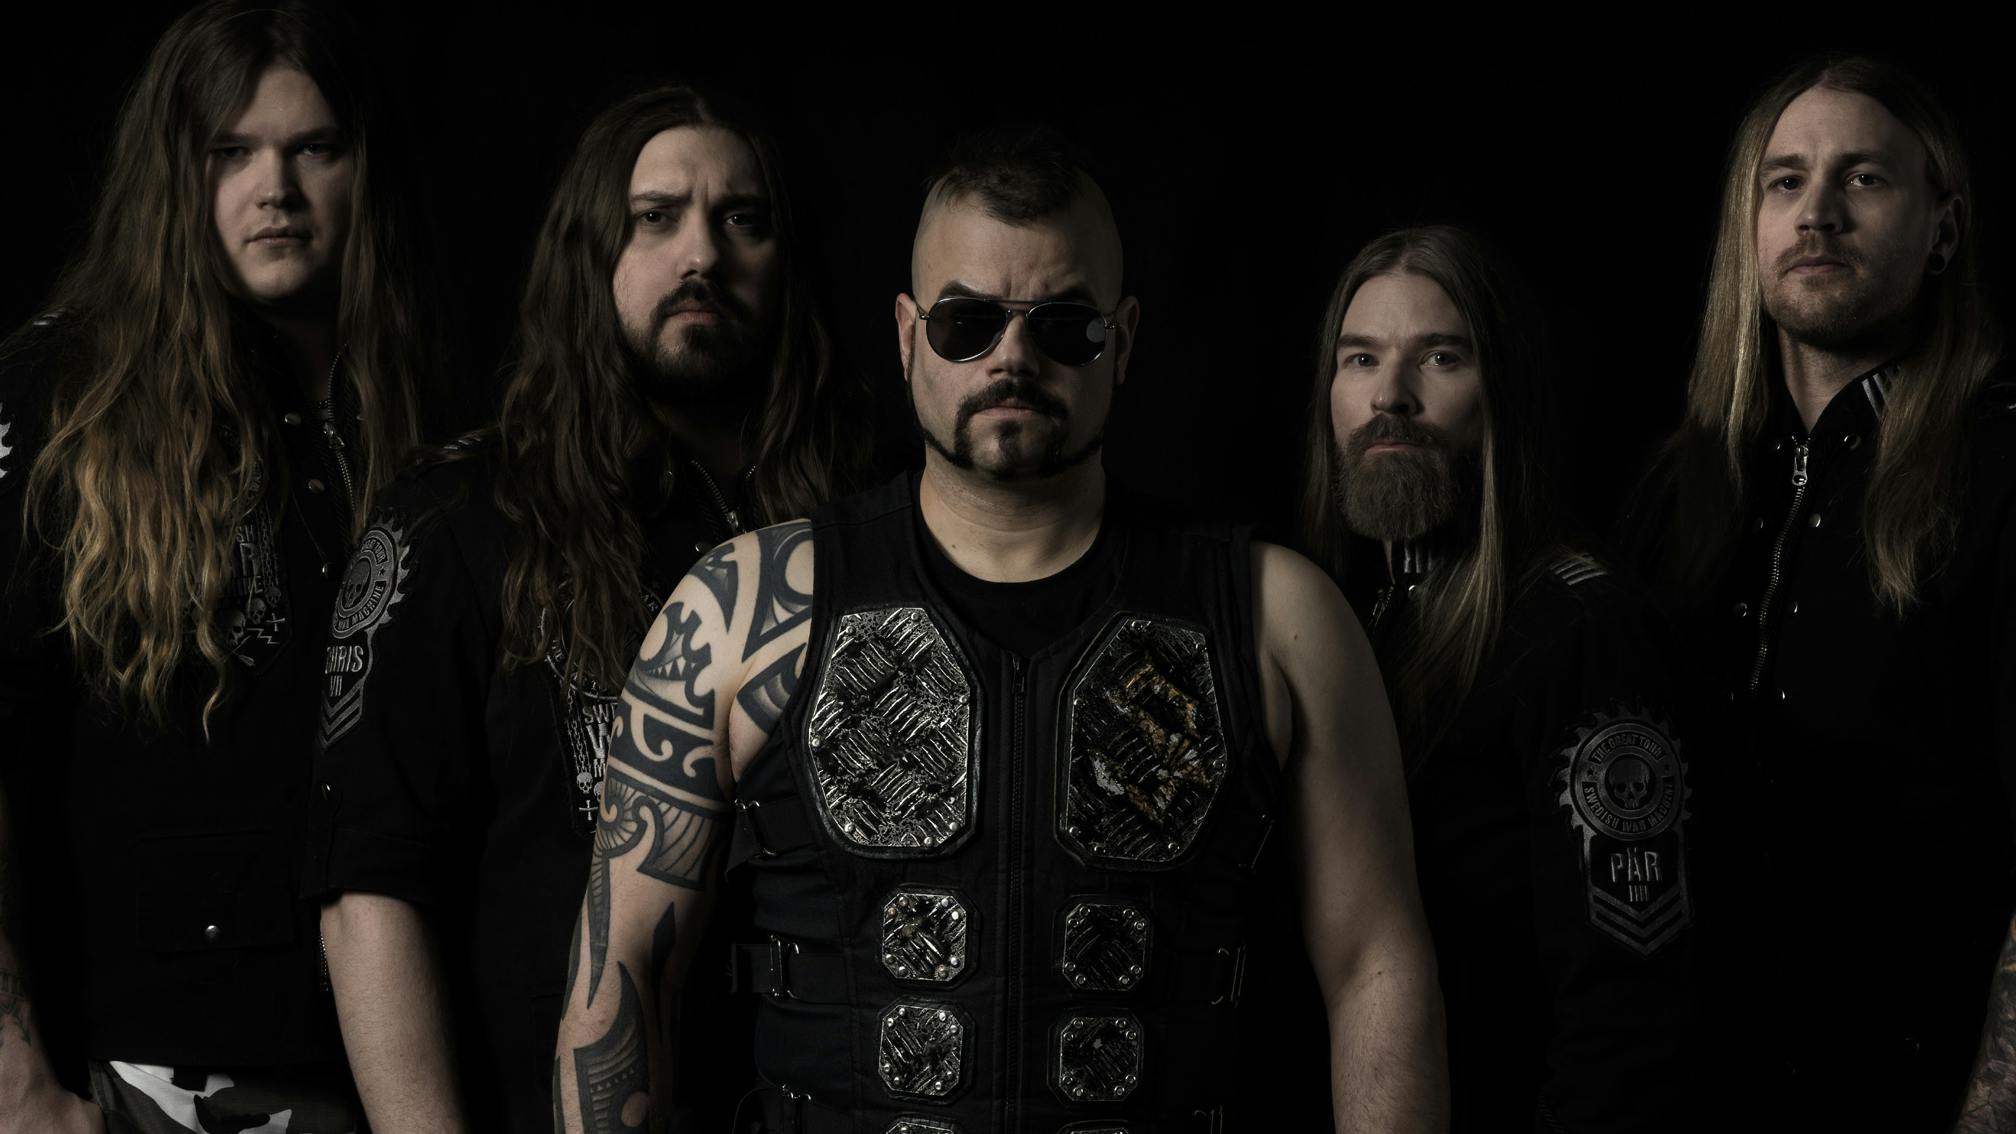 Sabaton announce The Tour To End All Tours with The HU and Lordi